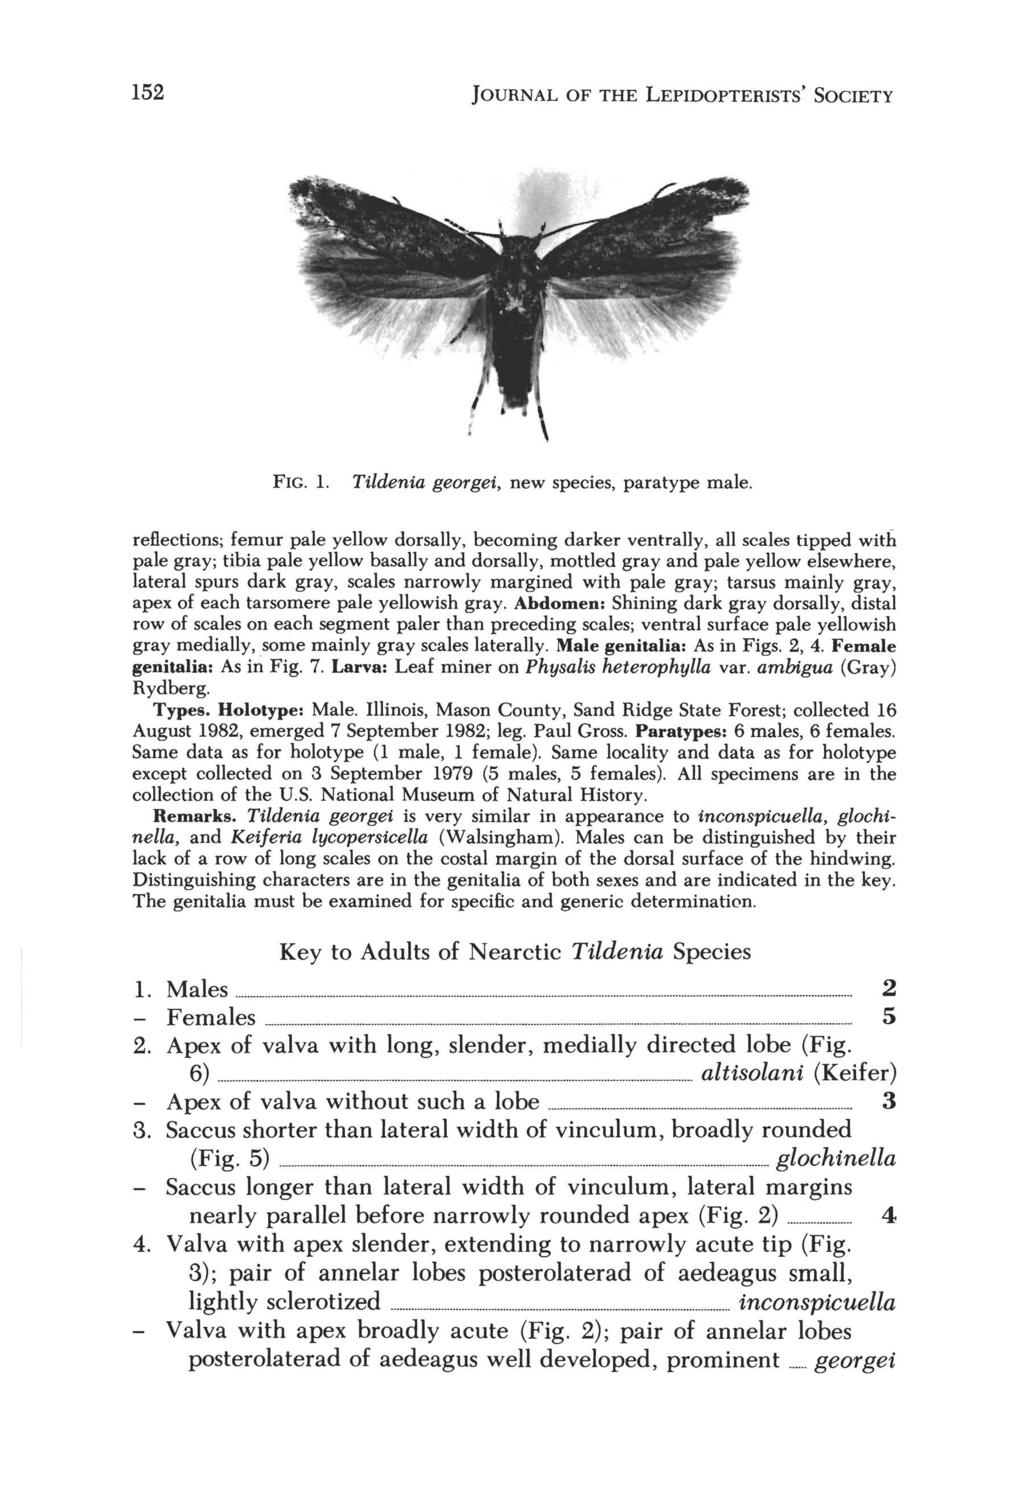 152 JOURNAL OF THE LEPIDOPTERISTS' SOCIETY FIG. 1. Tildenia georgei, new species, para type male.